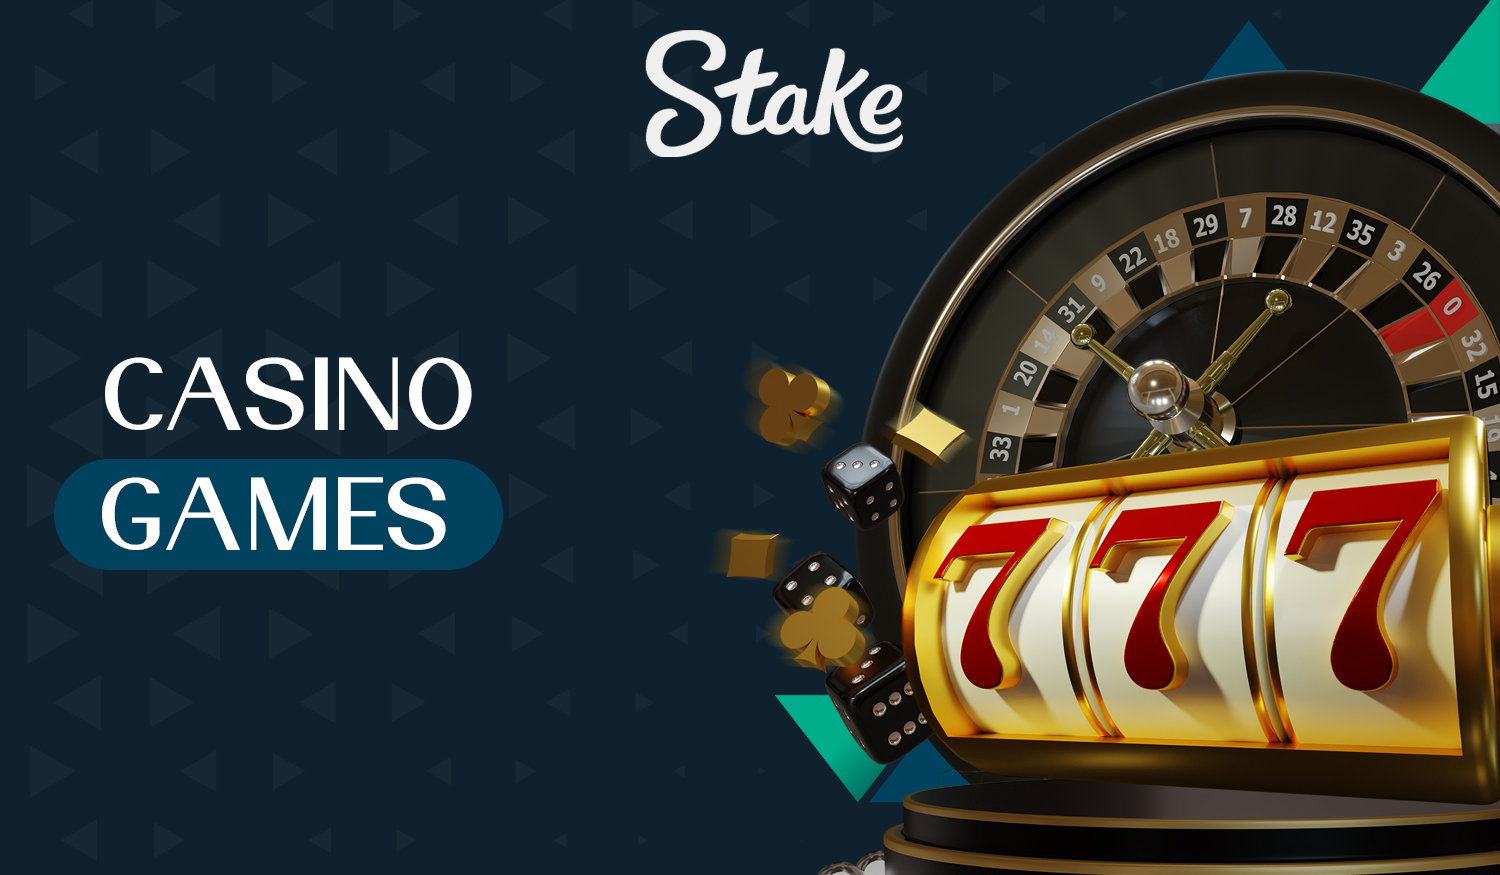 What kind of casino games does Stake offer to its online casino users?